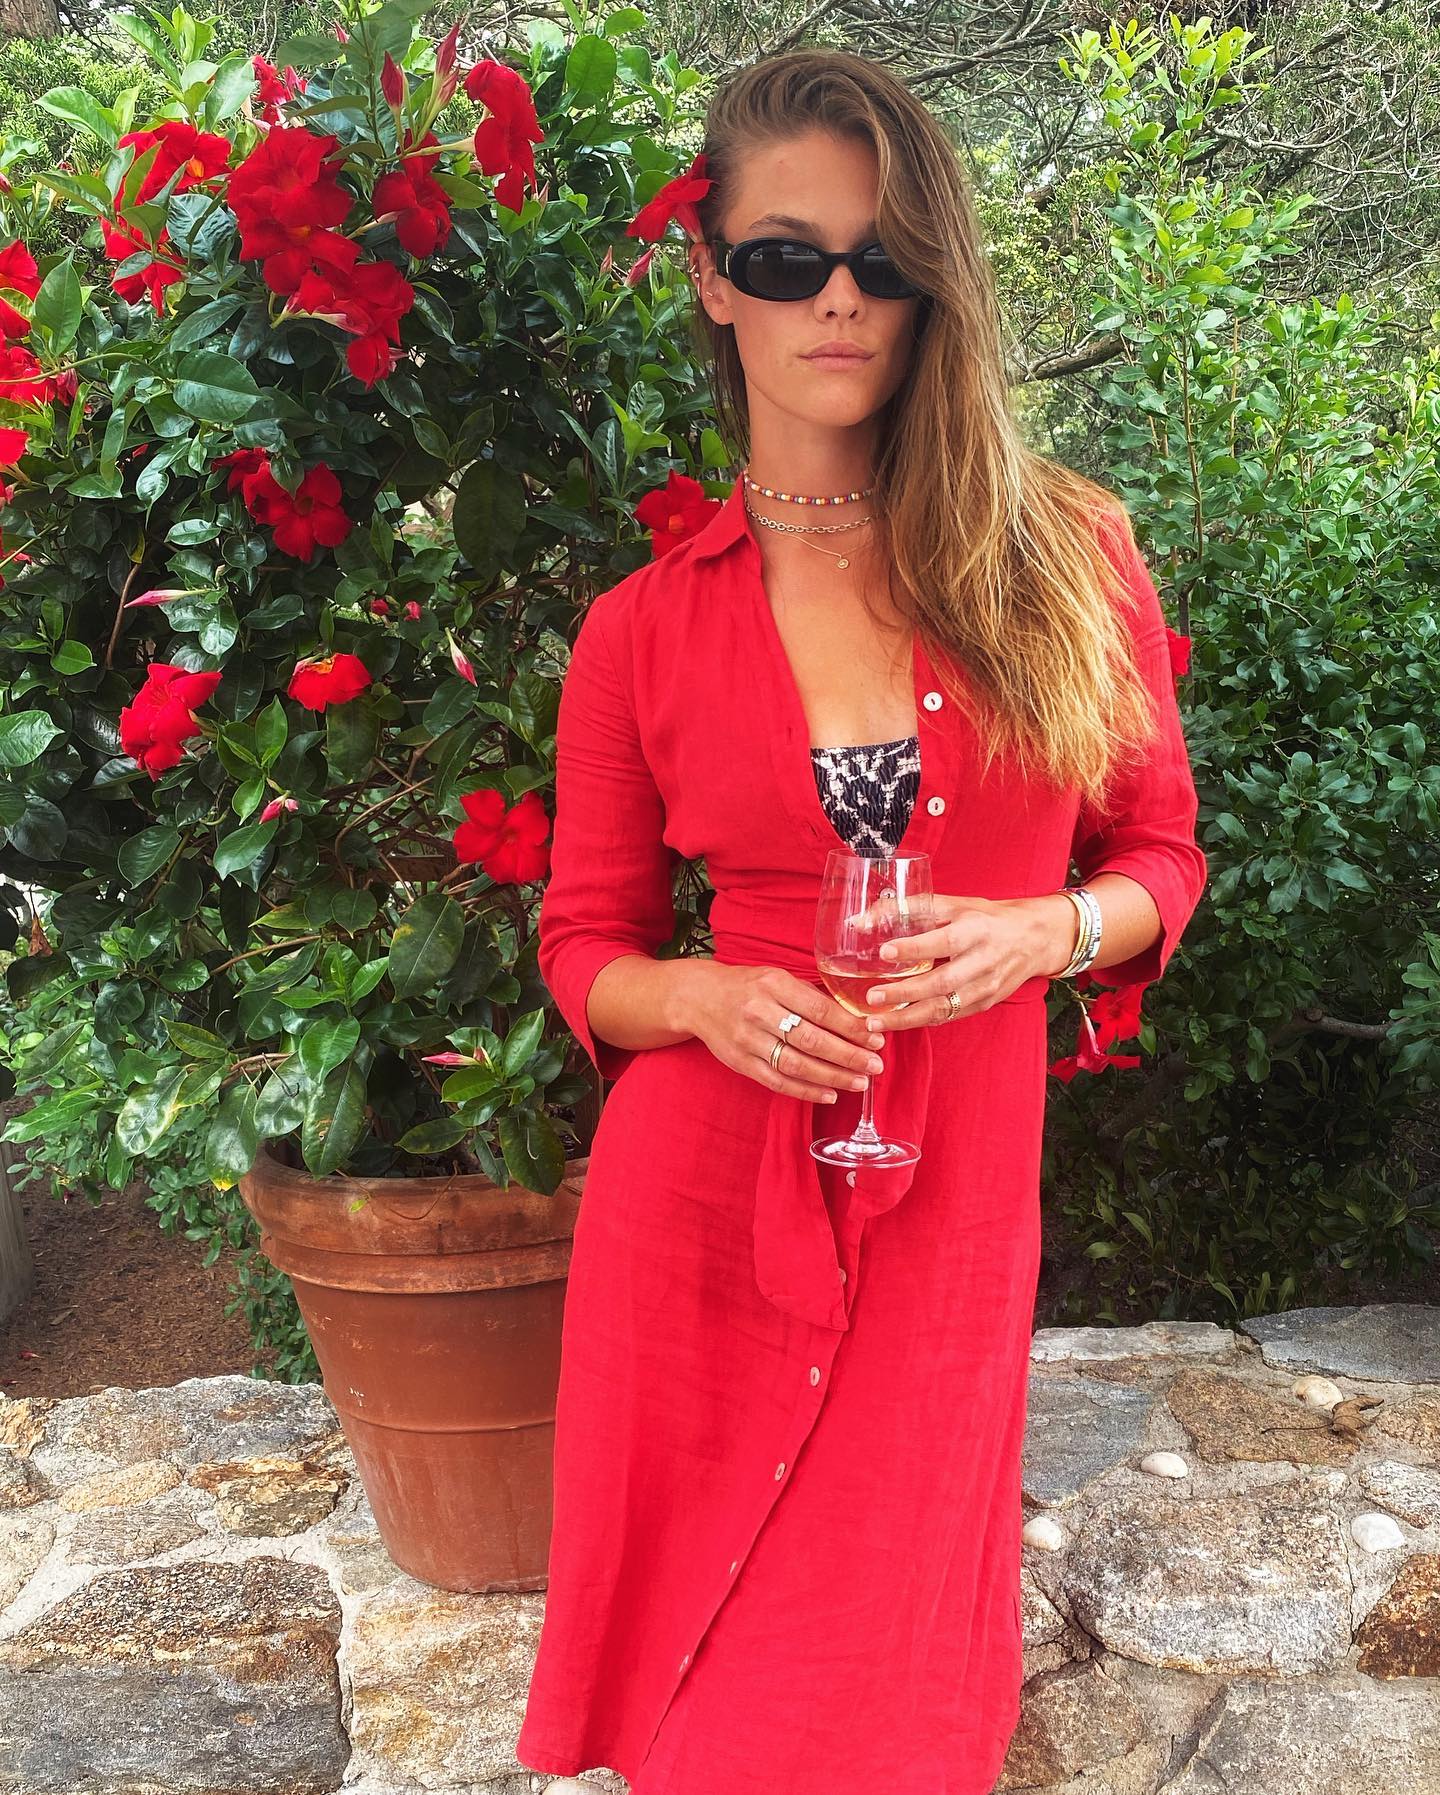 Photos n°4 : Nina Agdal is The Lady in Red!